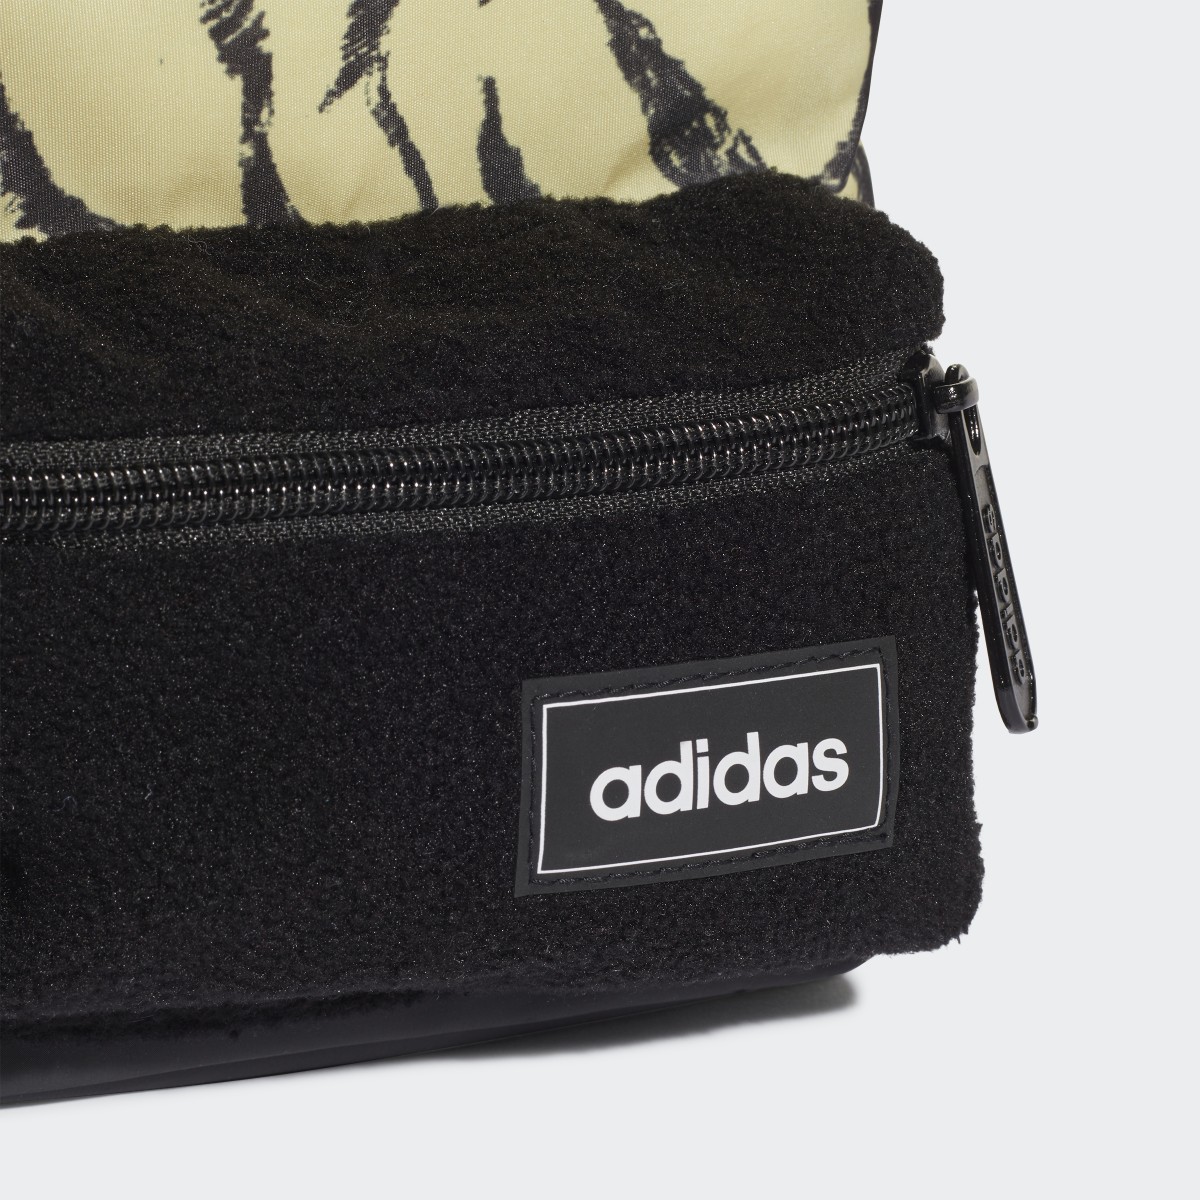 Adidas Tailored for Her Sport to Street Training Mini Rucksack. 6